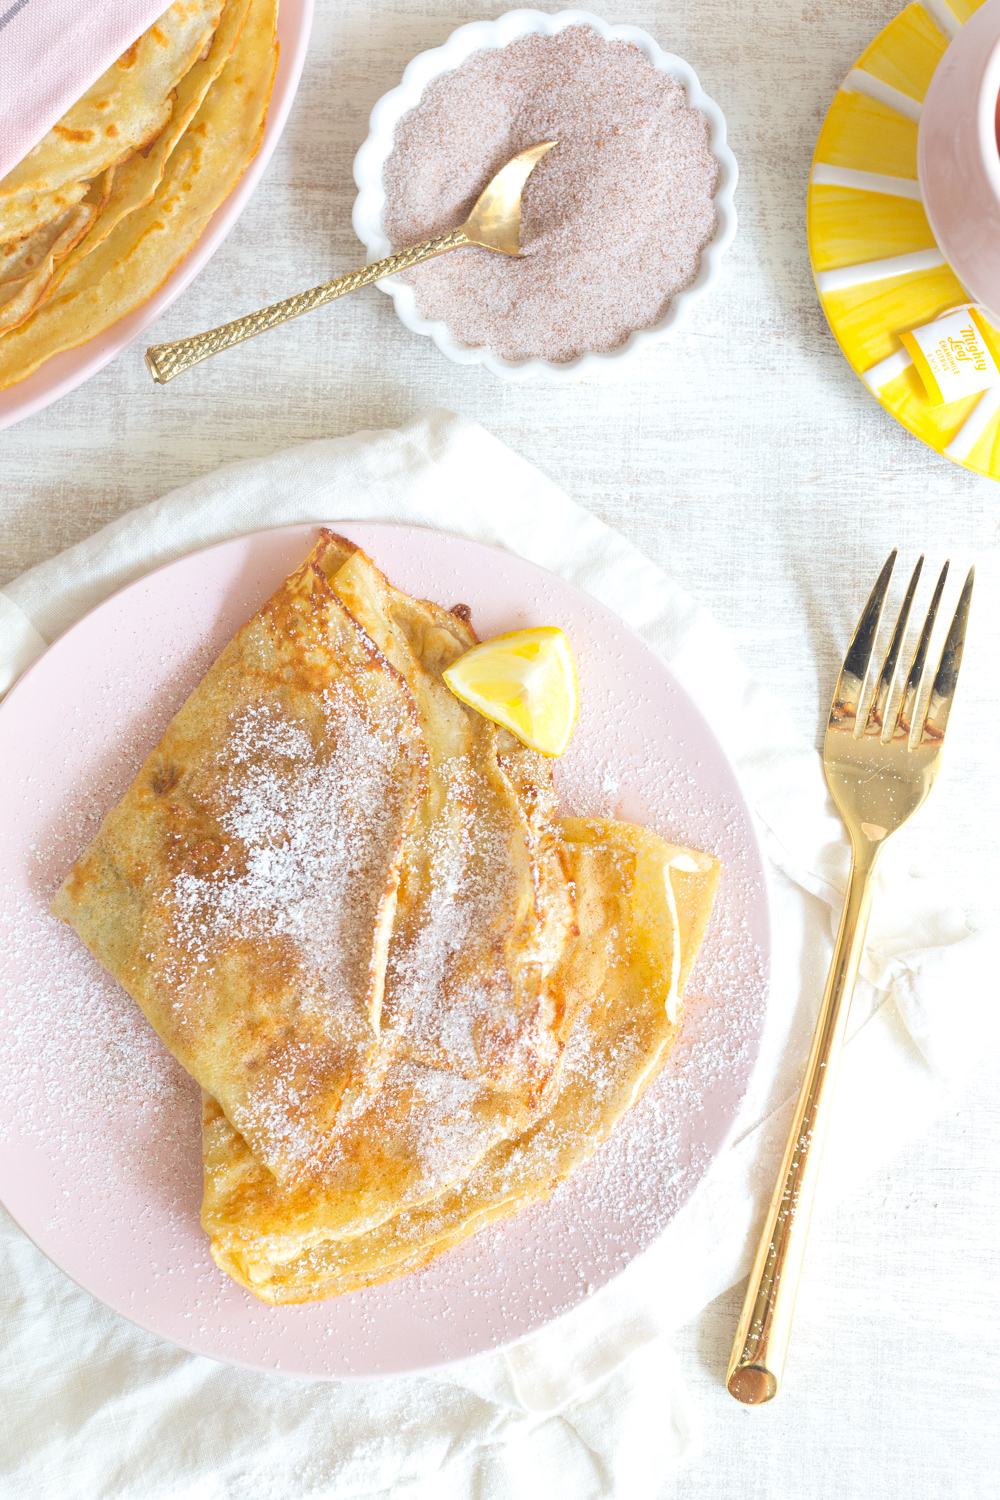 The Best Basic Crepes taste great any time of day.